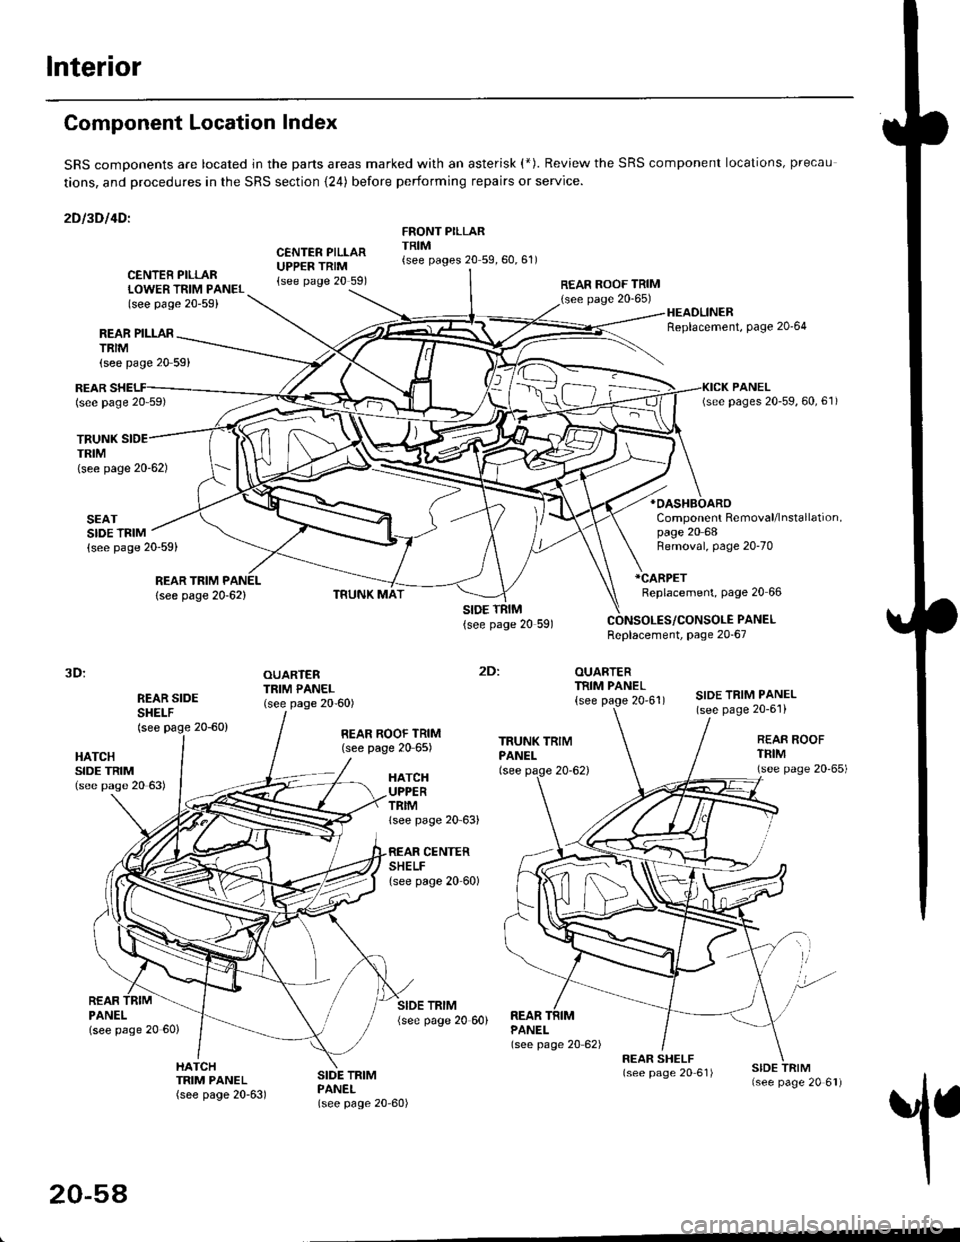 HONDA CIVIC 1998 6.G Workshop Manual Interior
Component Location Index
SRS comDonents are located jn the parts areas marked with an asterisk (*). Review the SRS component locations, precau
tions, and procedures in the SRS section {24) be